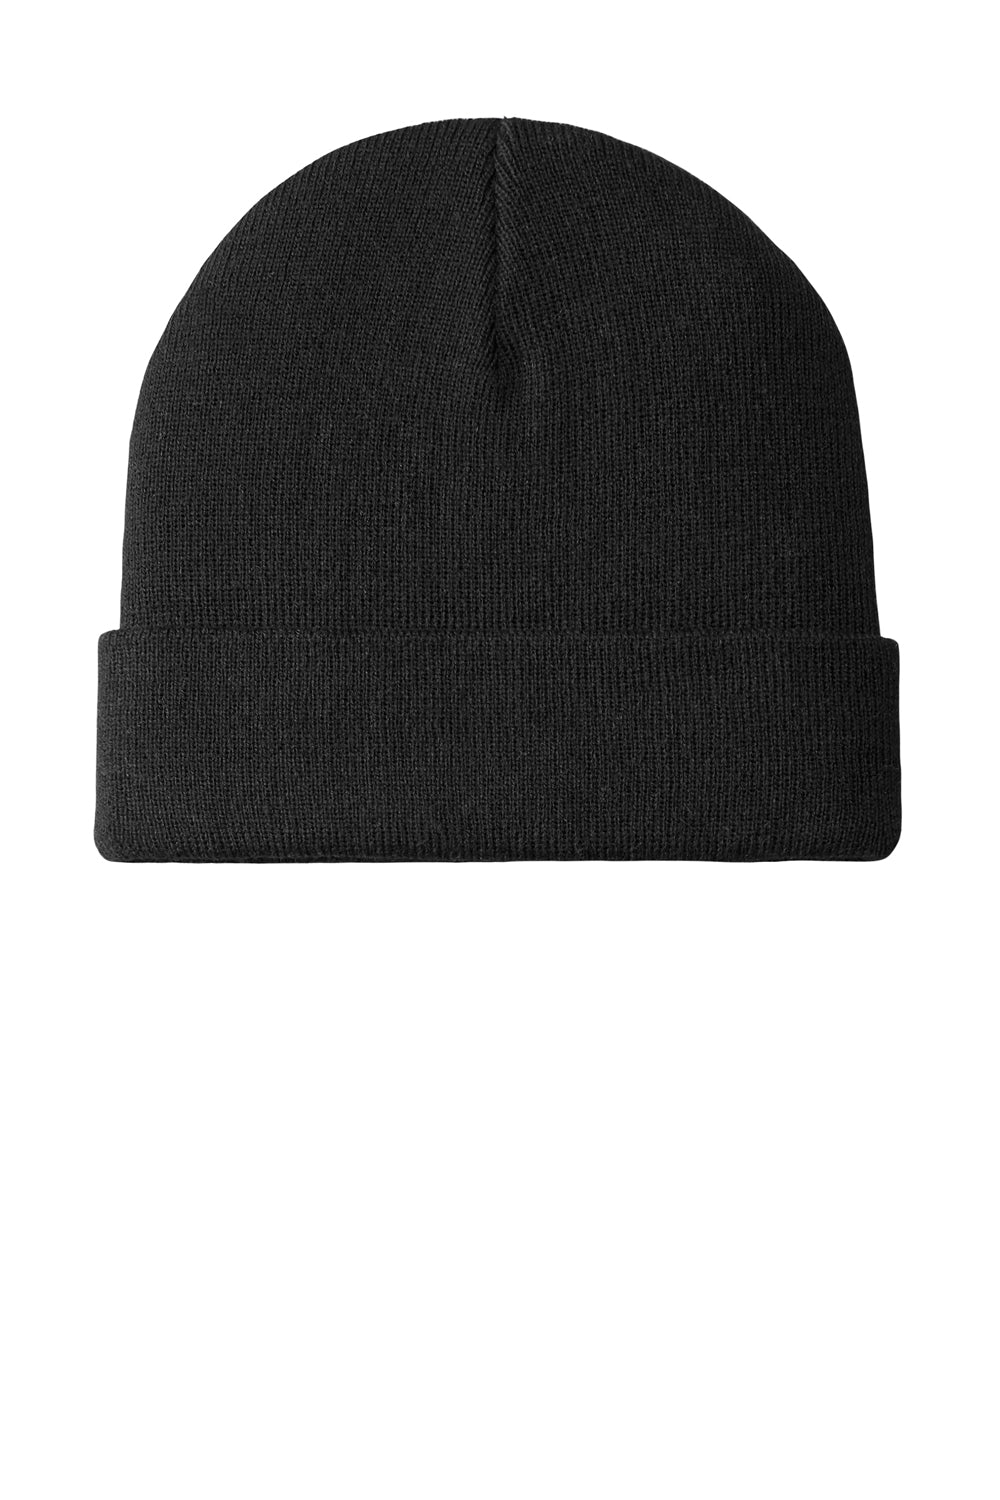 Port Authority C939 Knit Cuff Beanie Black Front